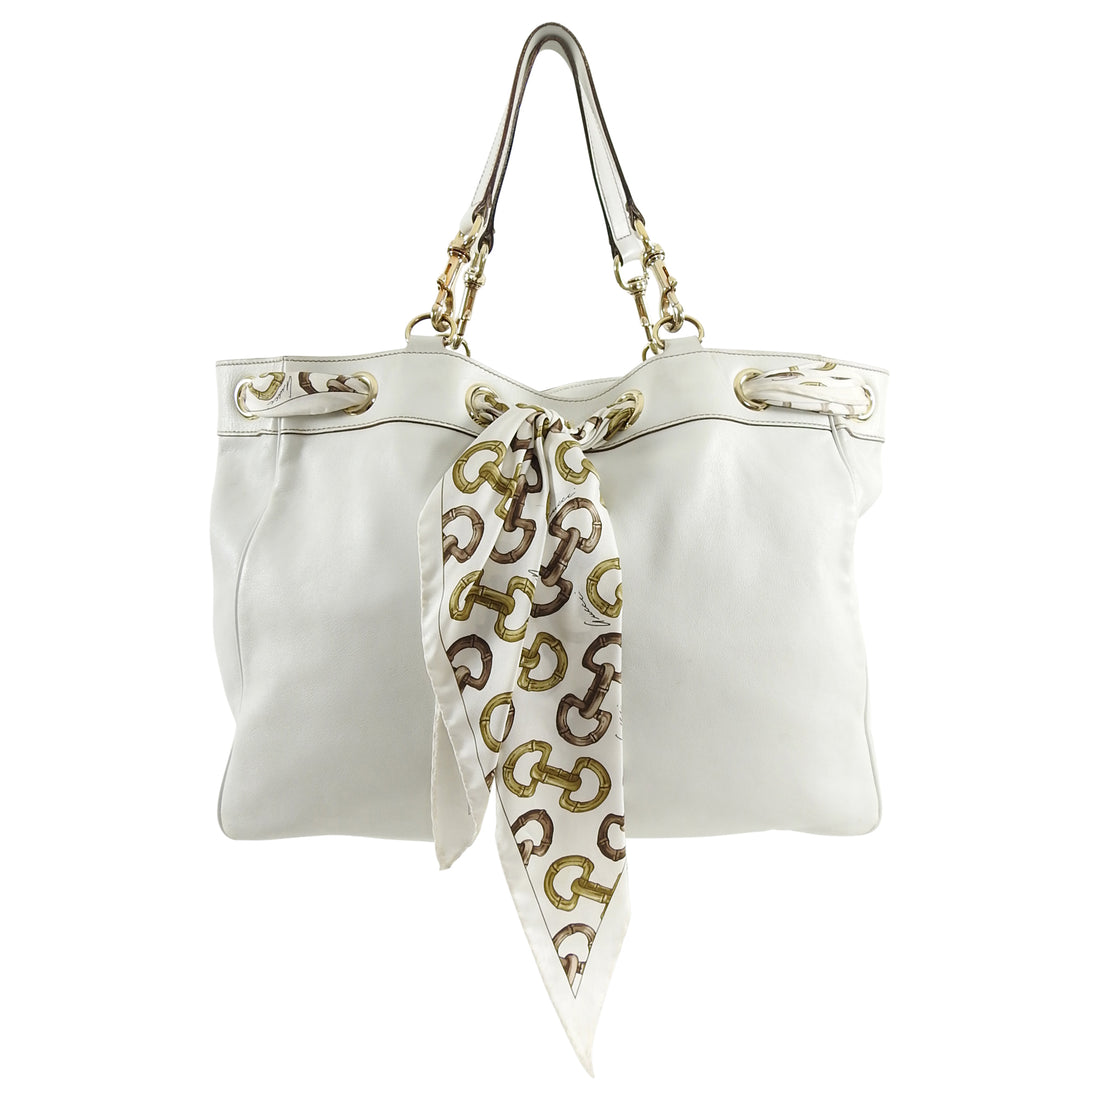 Gucci White Positano Large Leather Tote Bag with Silk Scarf